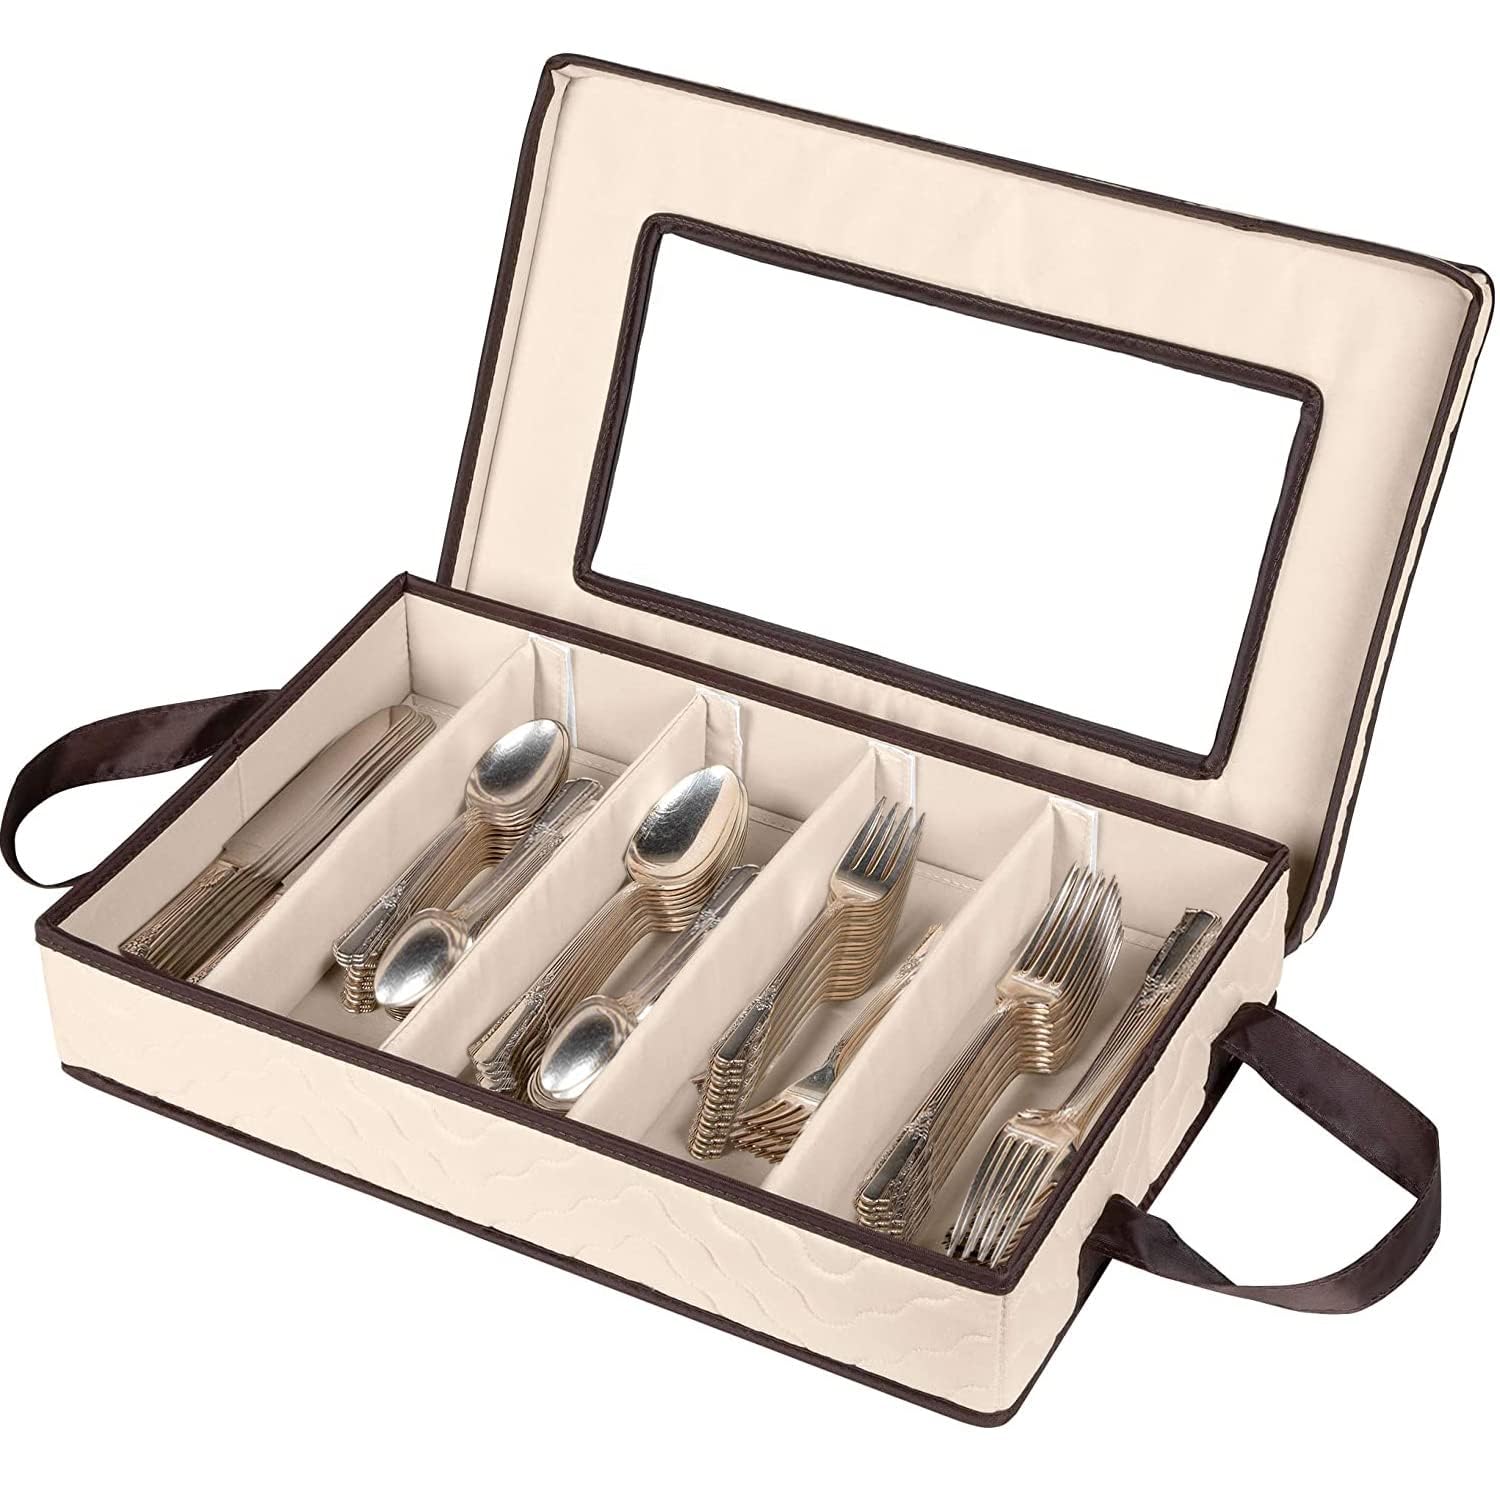 Flatware Storage Case - Durable 5 Compartment Silverware Storage Container Box with Removable Lid and Easy to Carry Handles - Large Capacity Keeps Your Cutlery Organized & Protected  - Like New